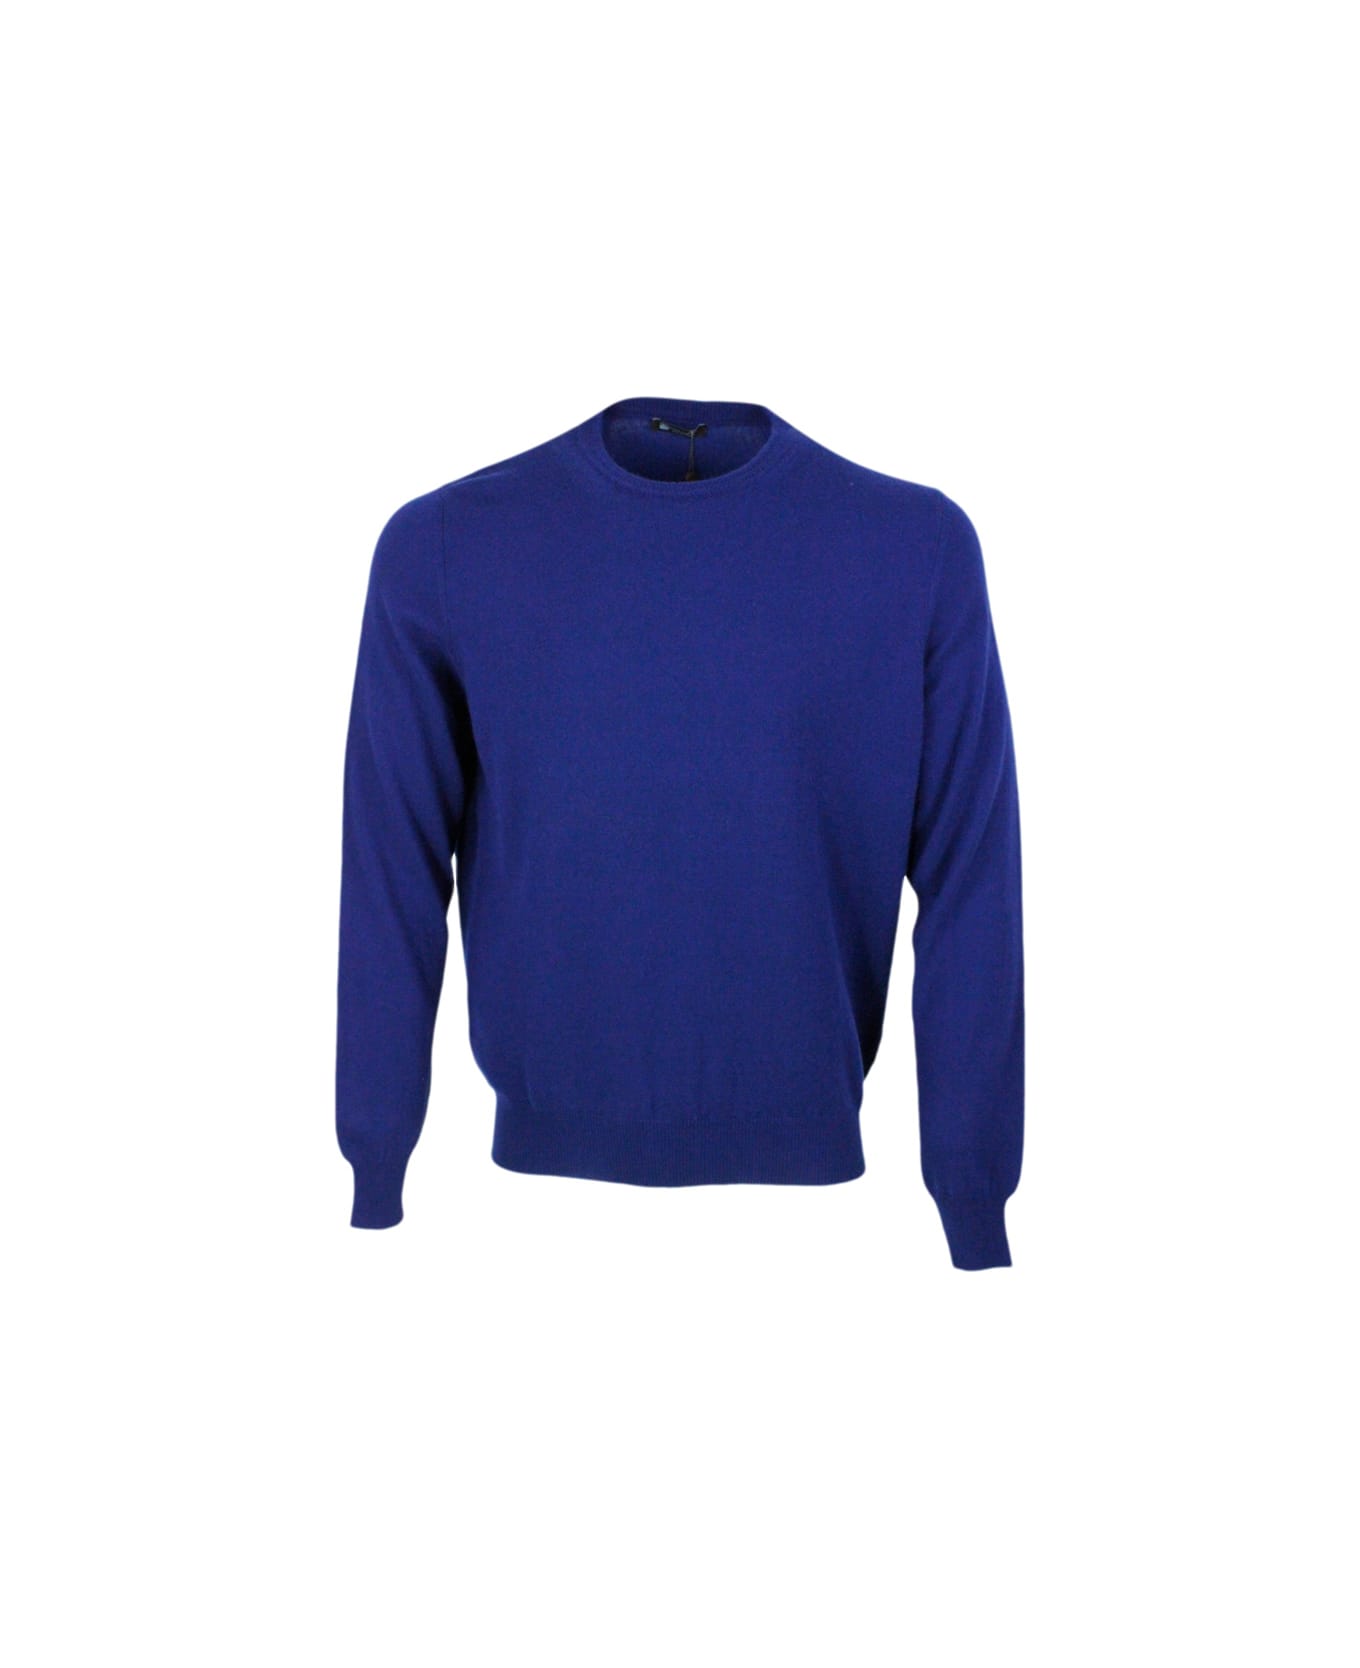 Colombo Long-sleeved Crewneck Sweater In Fine 2-ply 100% Kid Cashmere With Special Processing On The Edge Of The Neck - Blu royal